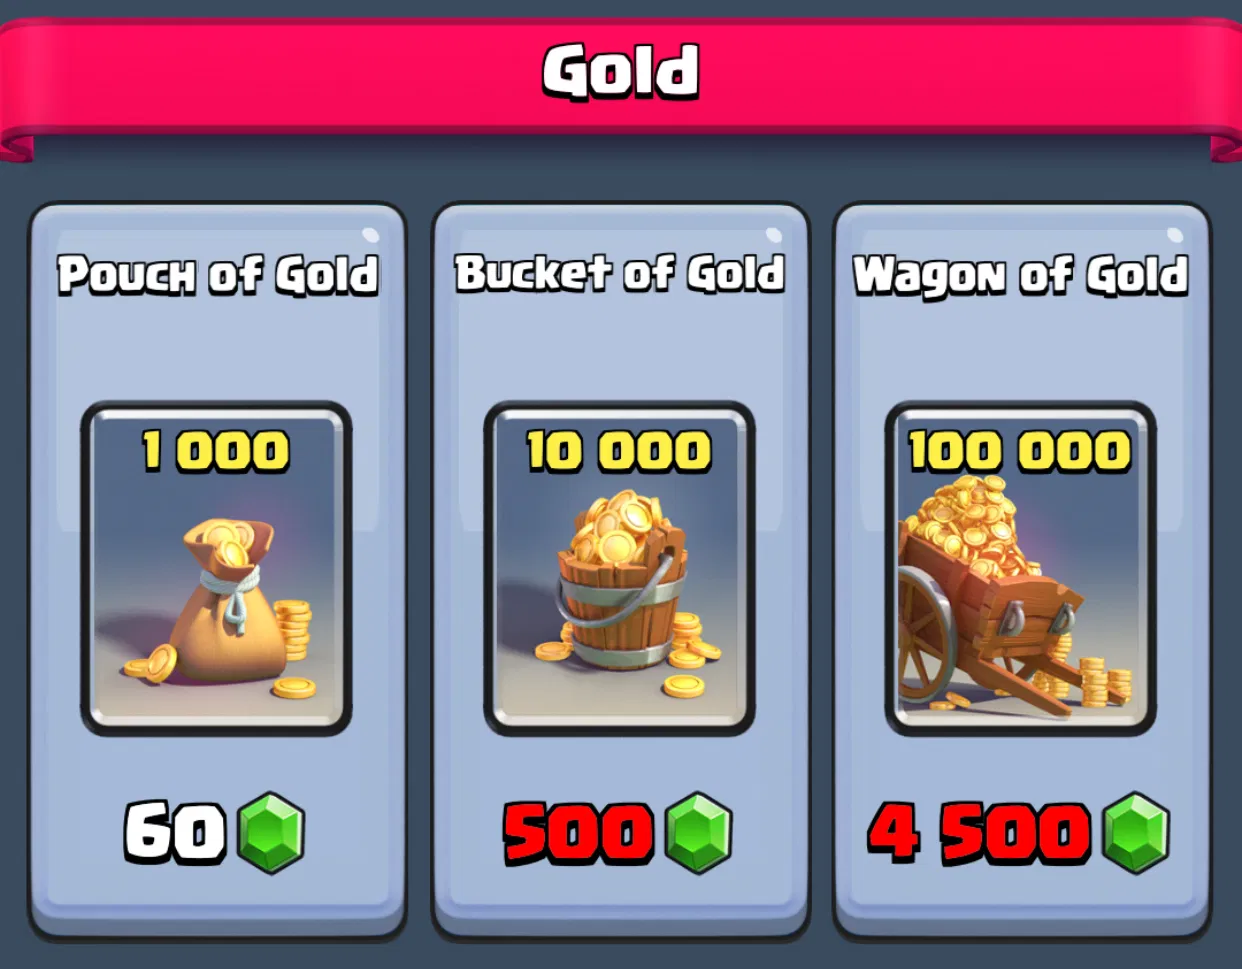 How to Get More Gems in Clash Royale